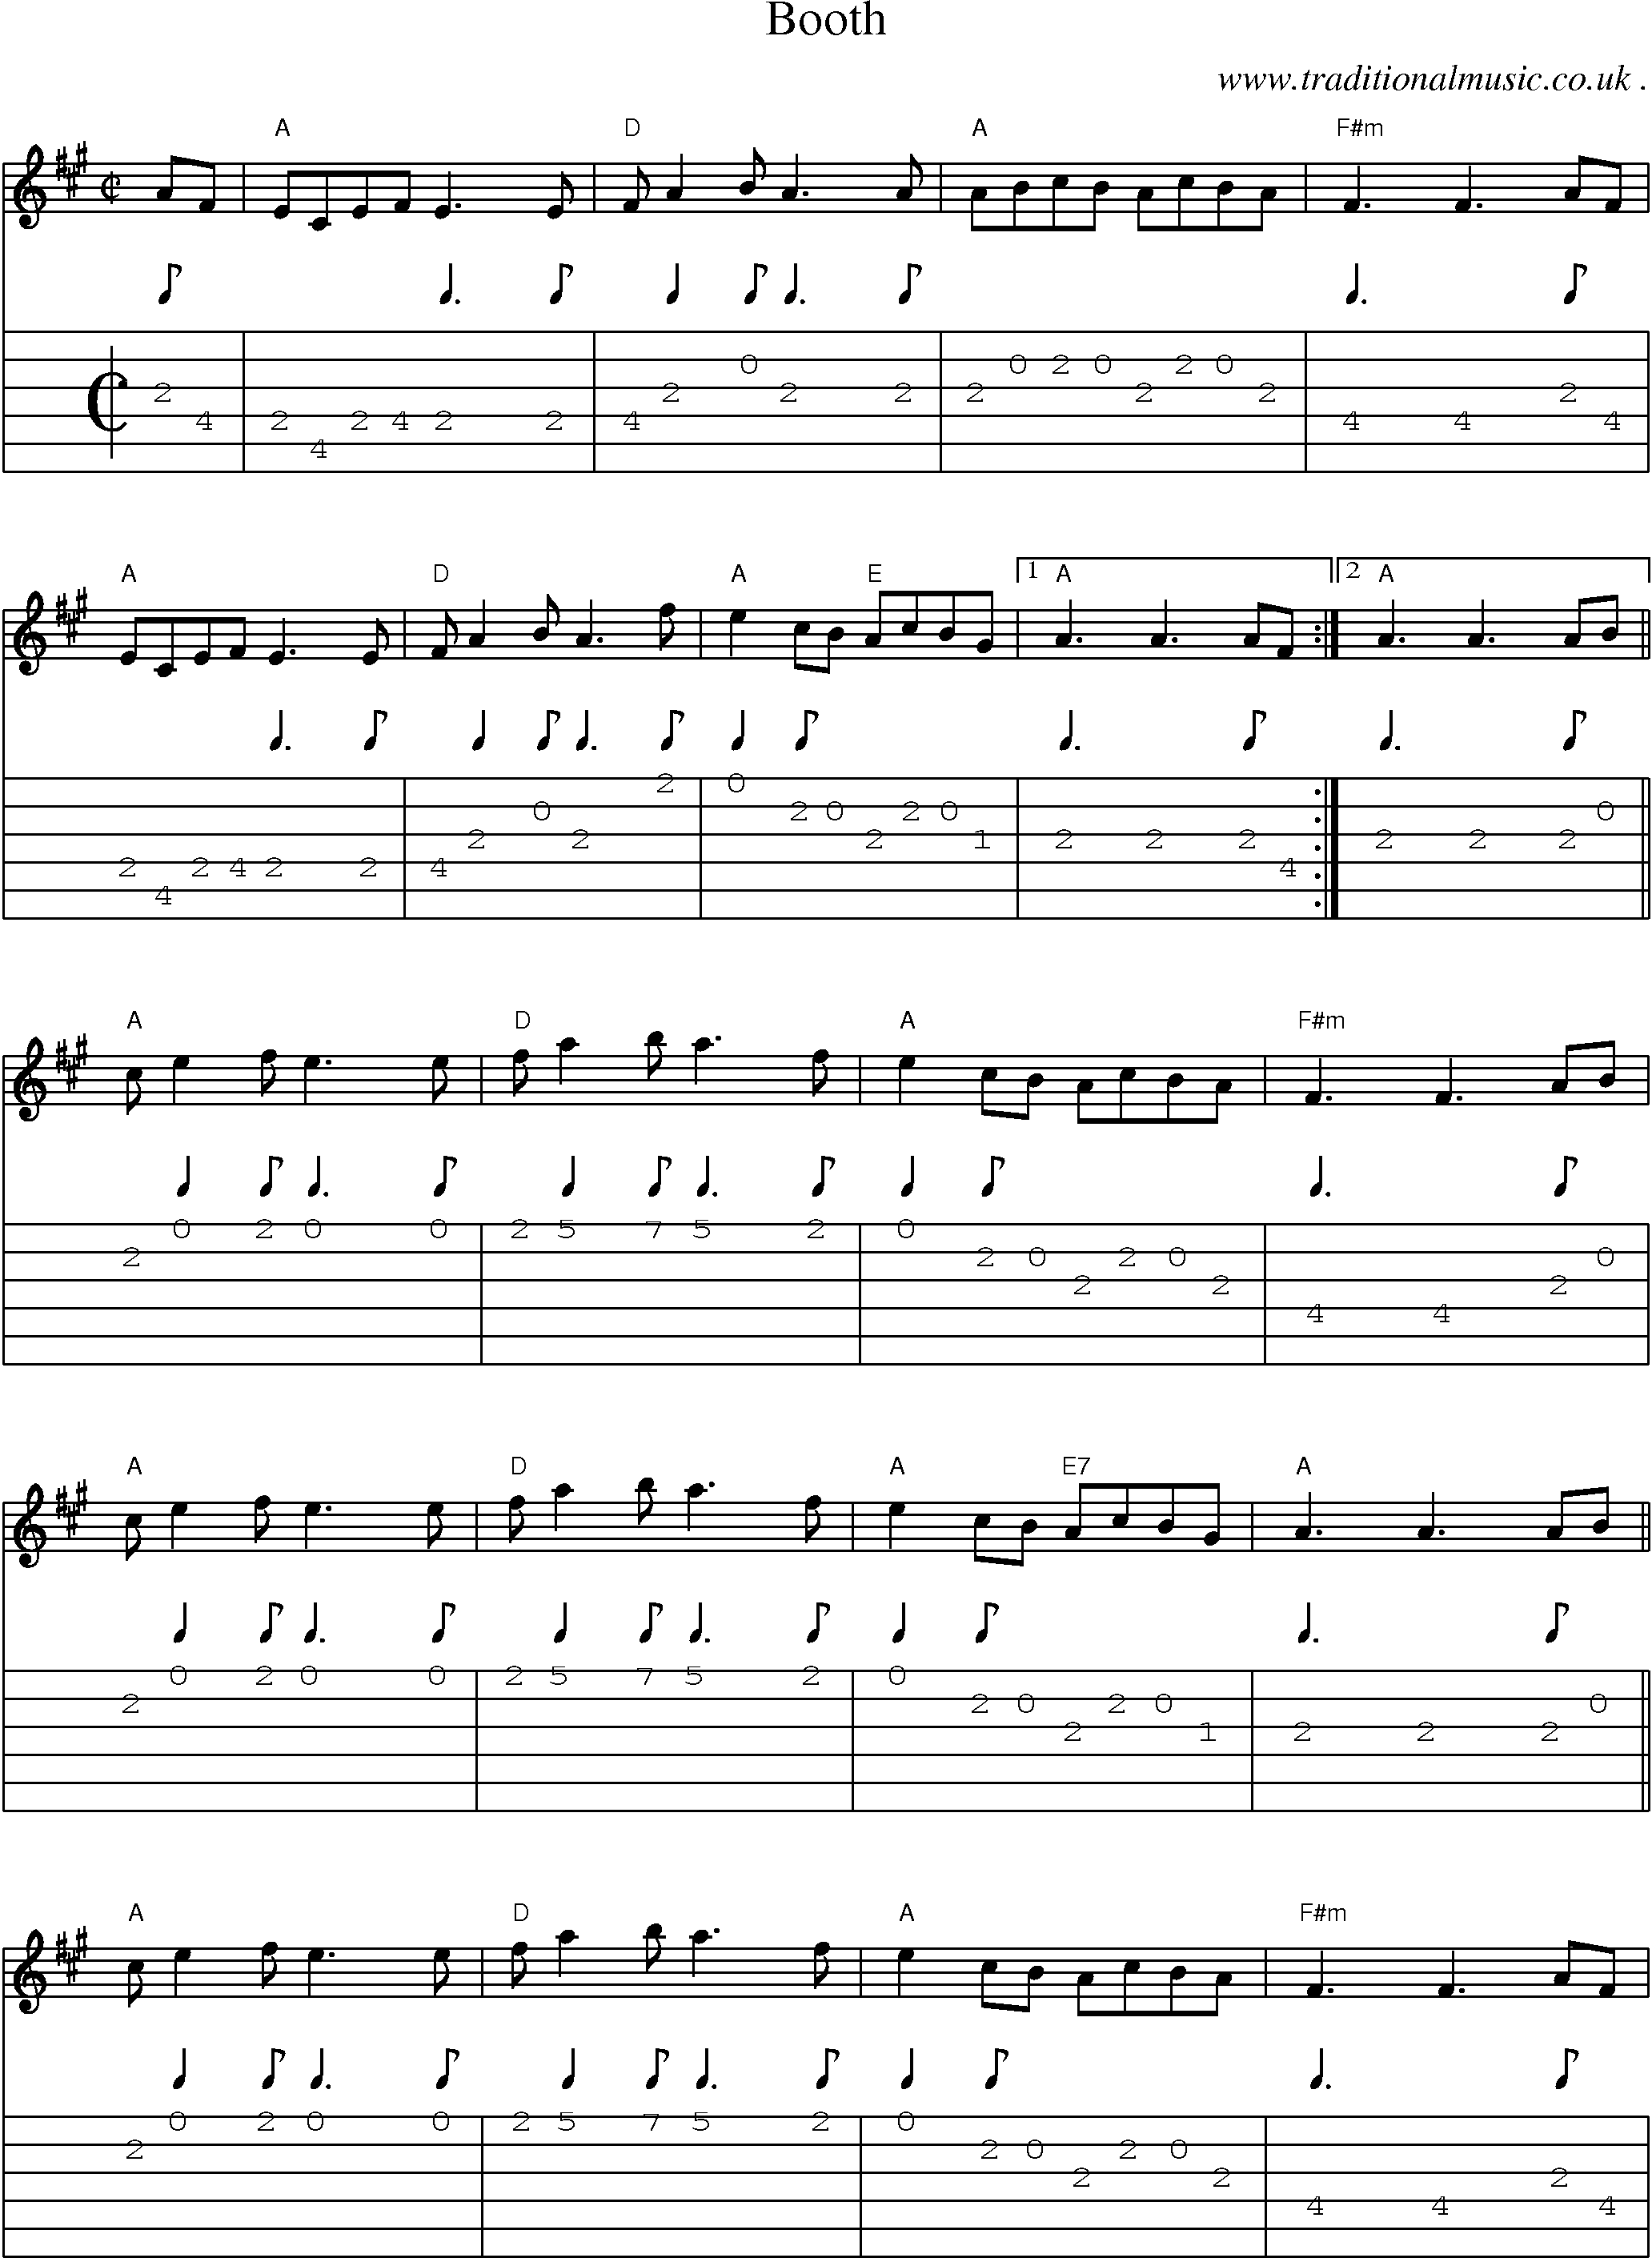 Music Score and Guitar Tabs for Booth